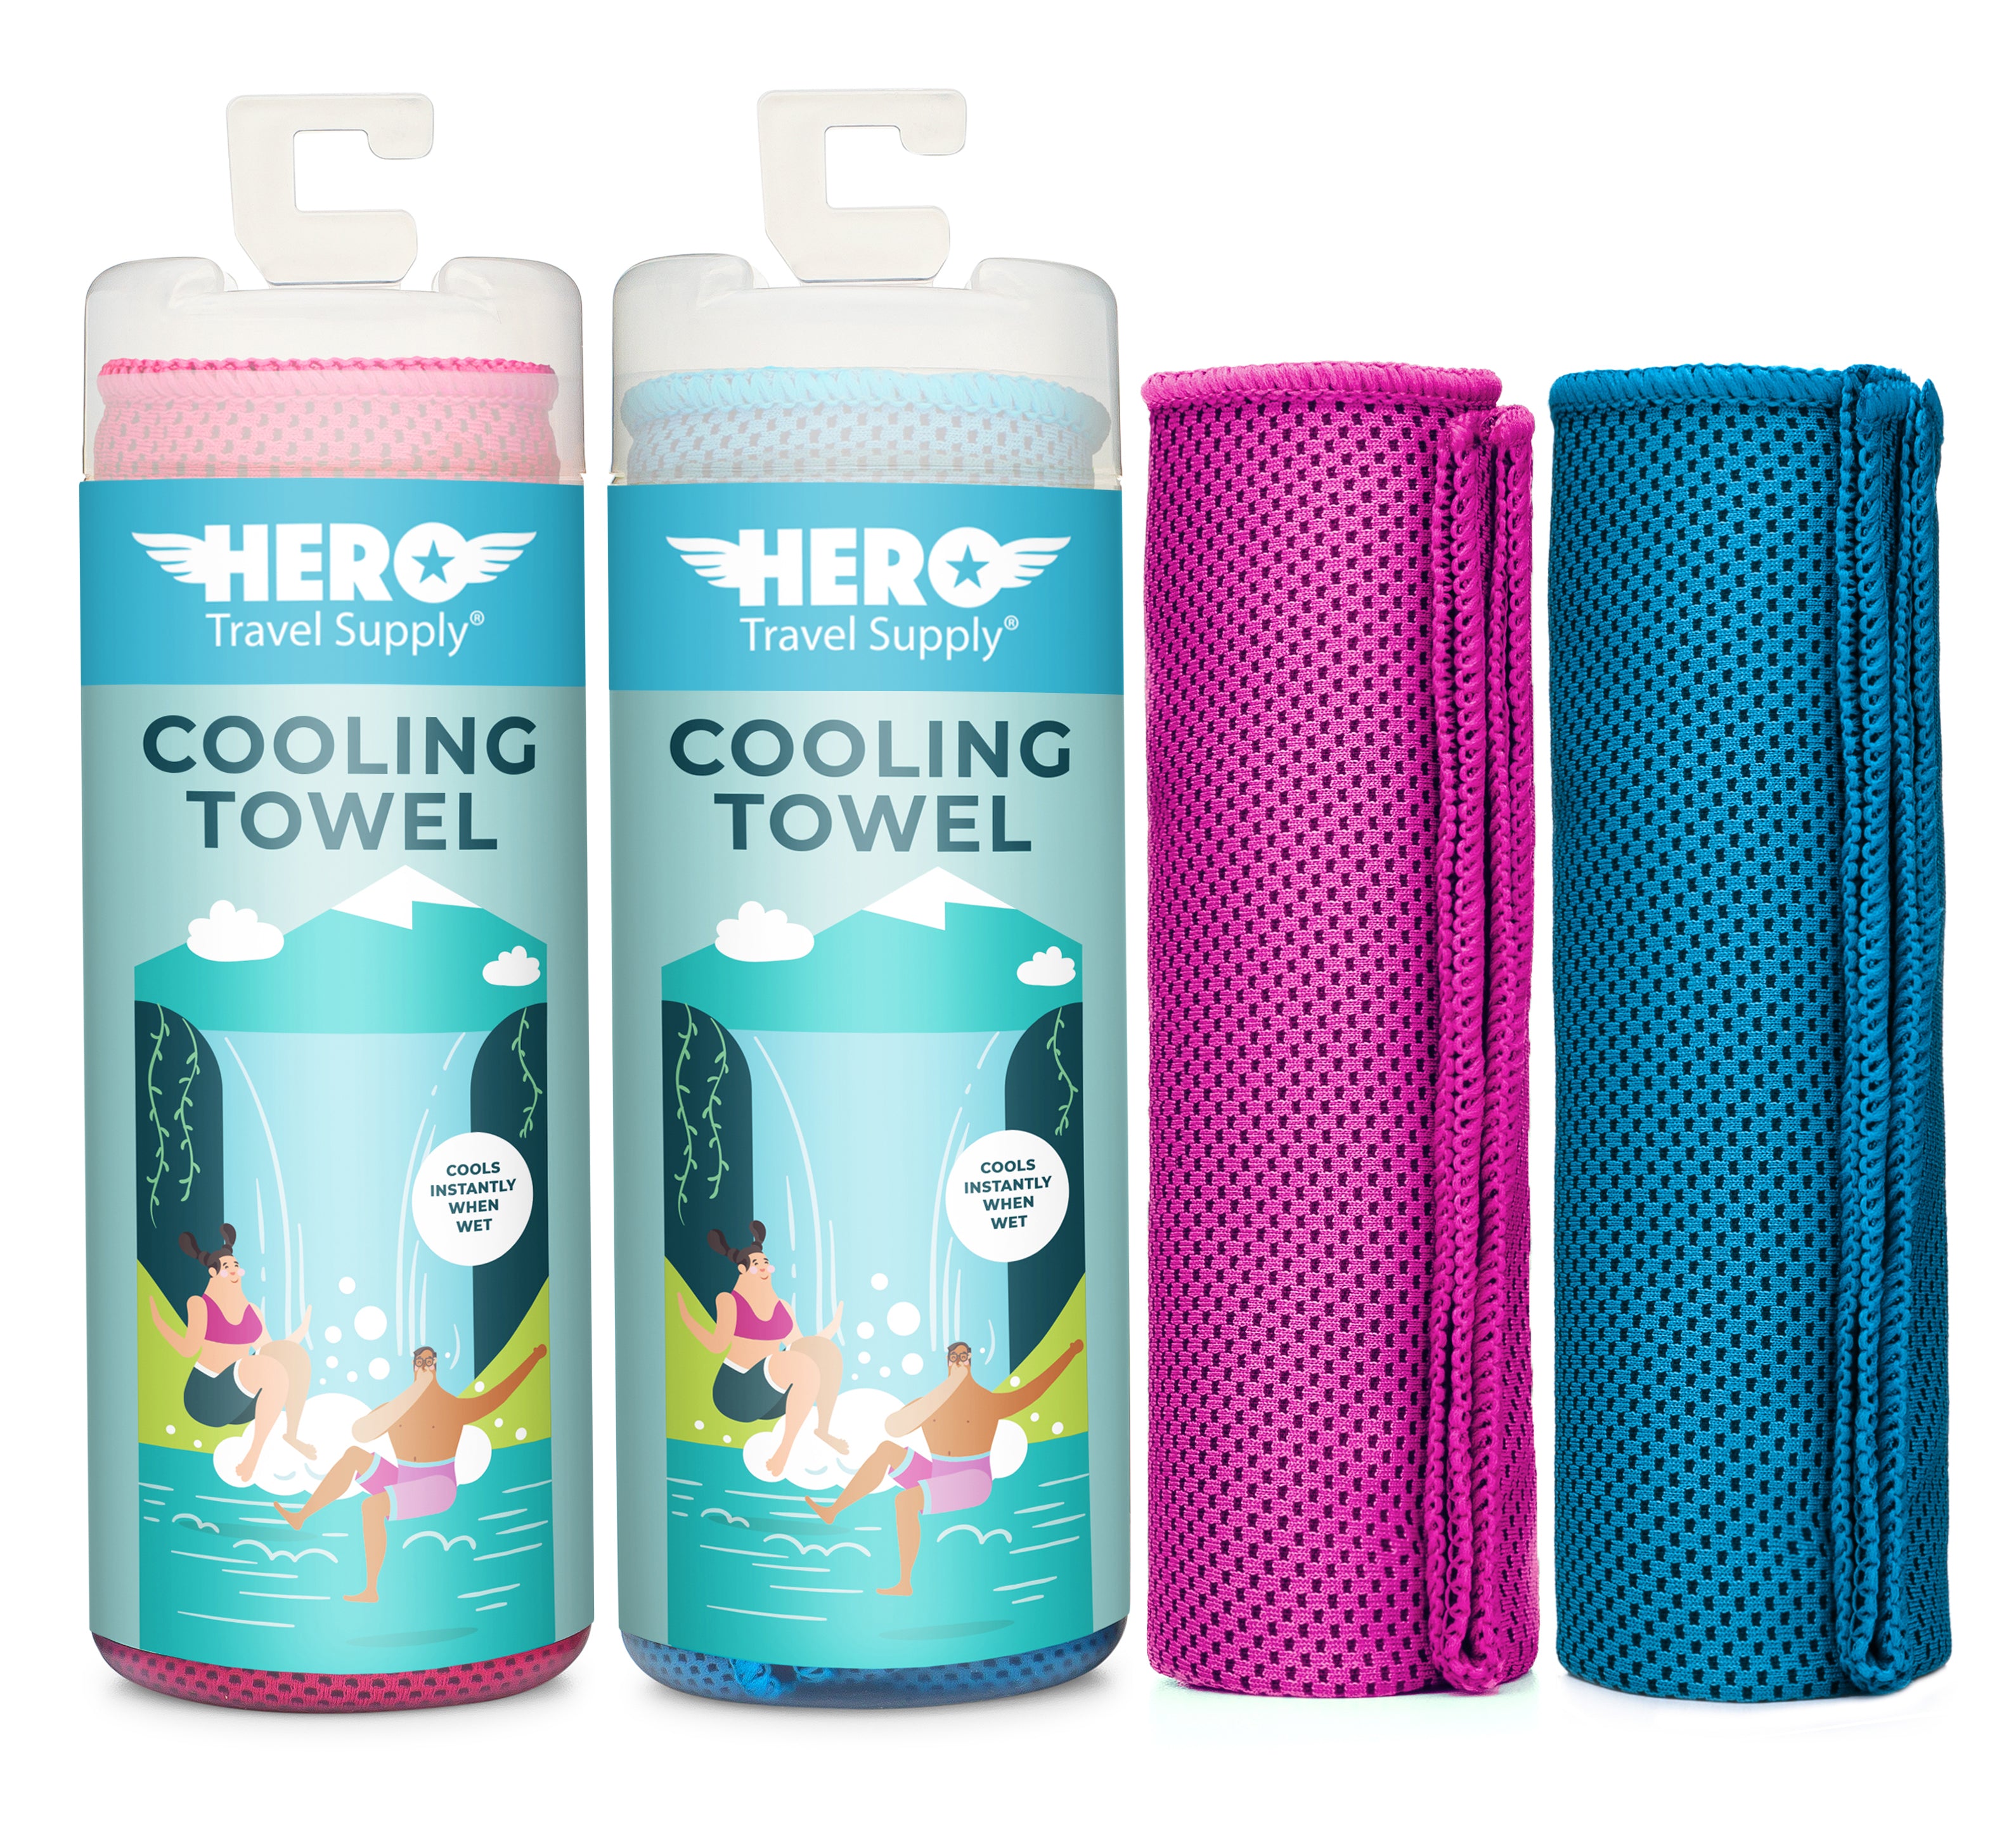 Instant Cooling Towel – Tough Outfitters